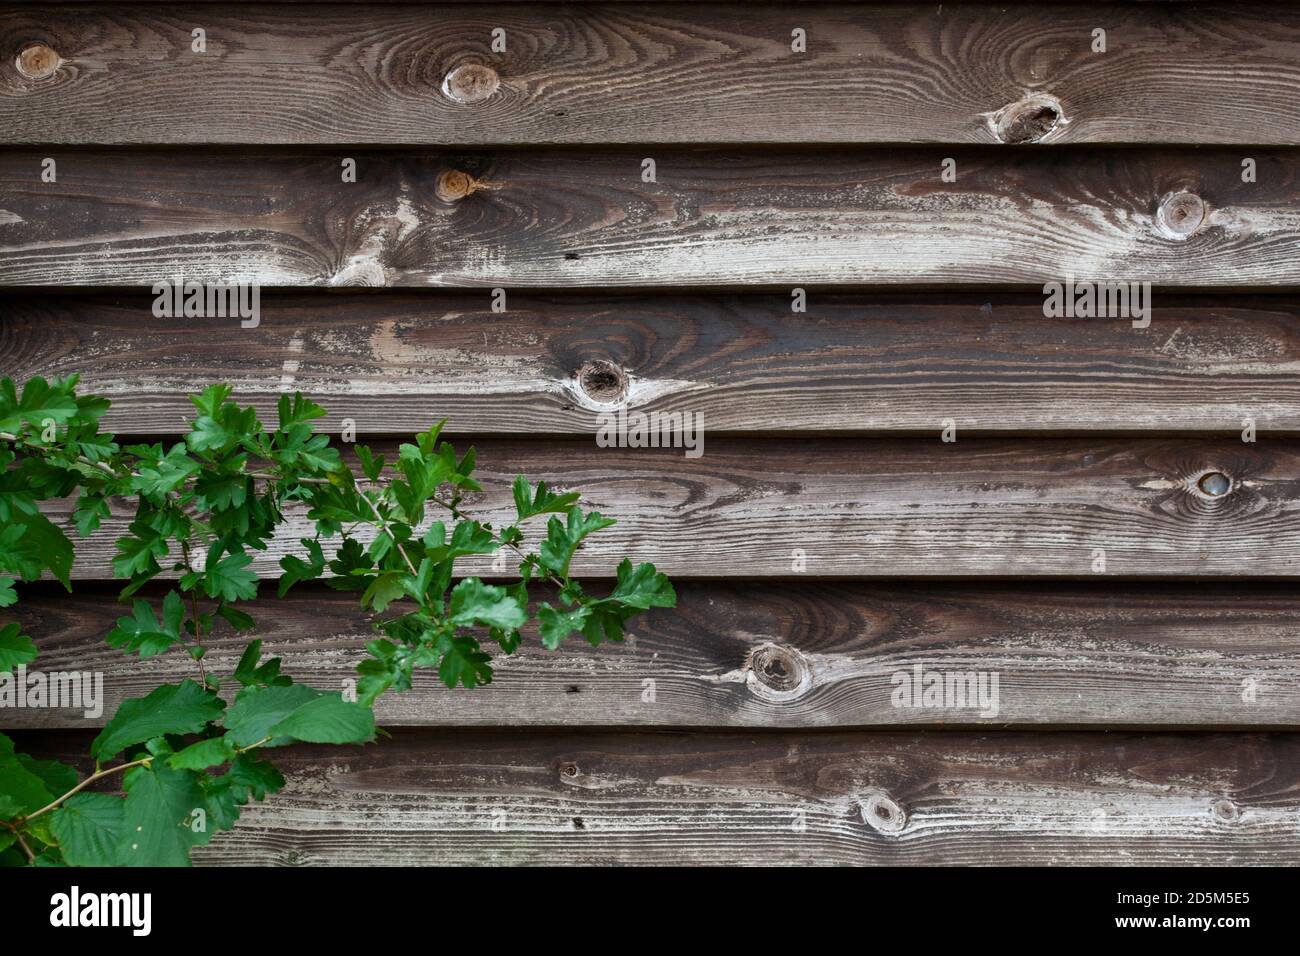 Worn wooden English fence panel background with foliage in left bottom corner. Stock Photo